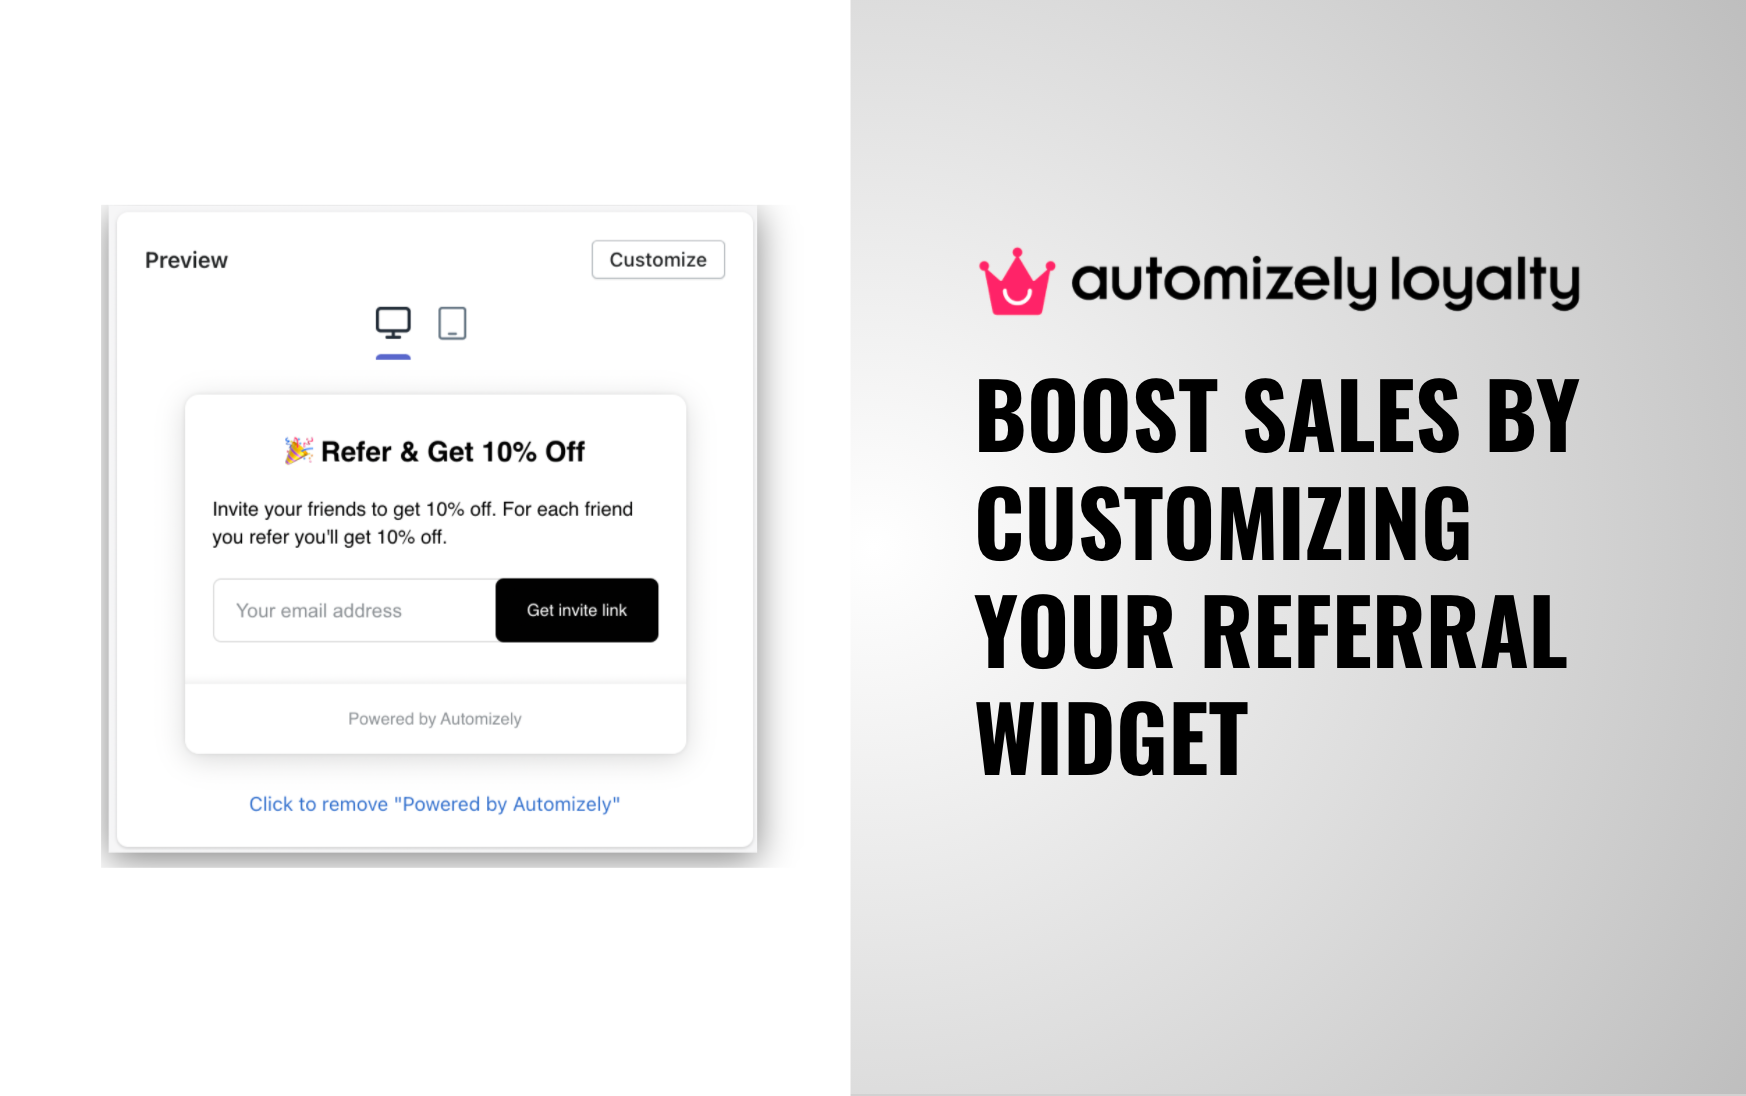 Automizely Loyalty: Boost Sales by Customizing Your Referral Widget and Popup